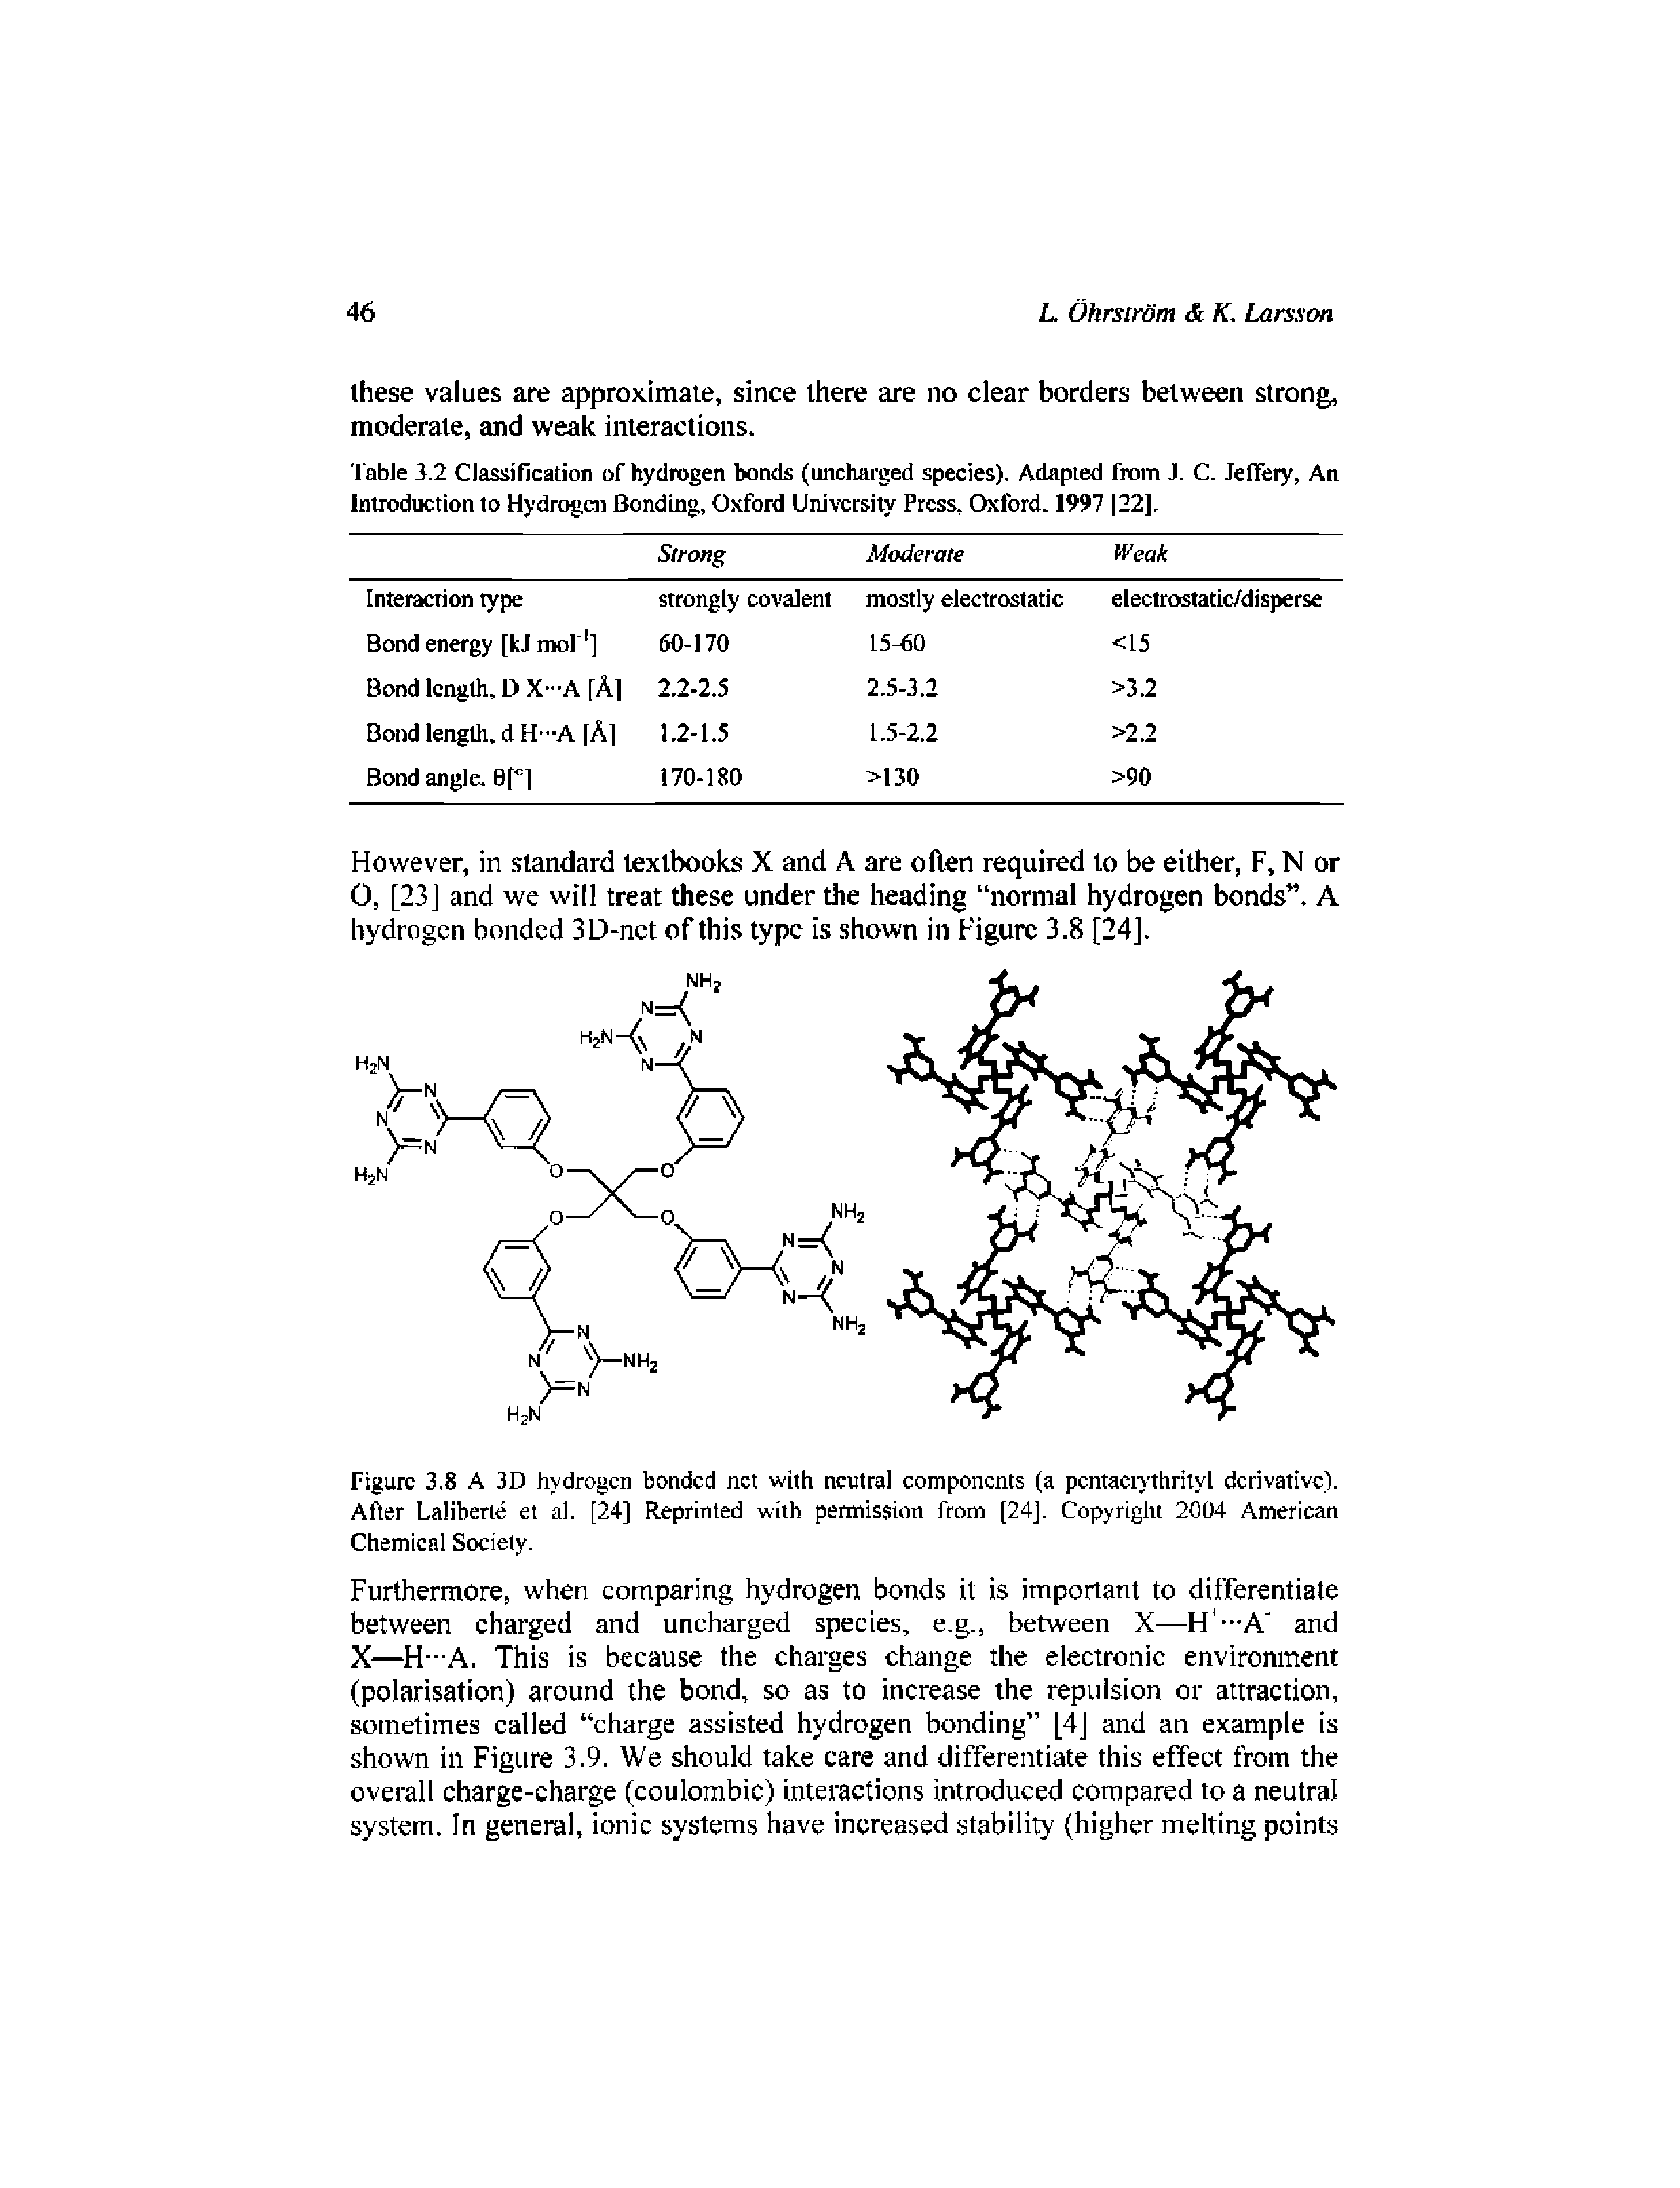 Table 3.2 Classification of hydrogen bonds (uncharged species). Adapted from J. C. Jeffery, An Introduction to Hydrogen Bonding, Oxford Uniwrsity Press, Oxford. 1997 22],...